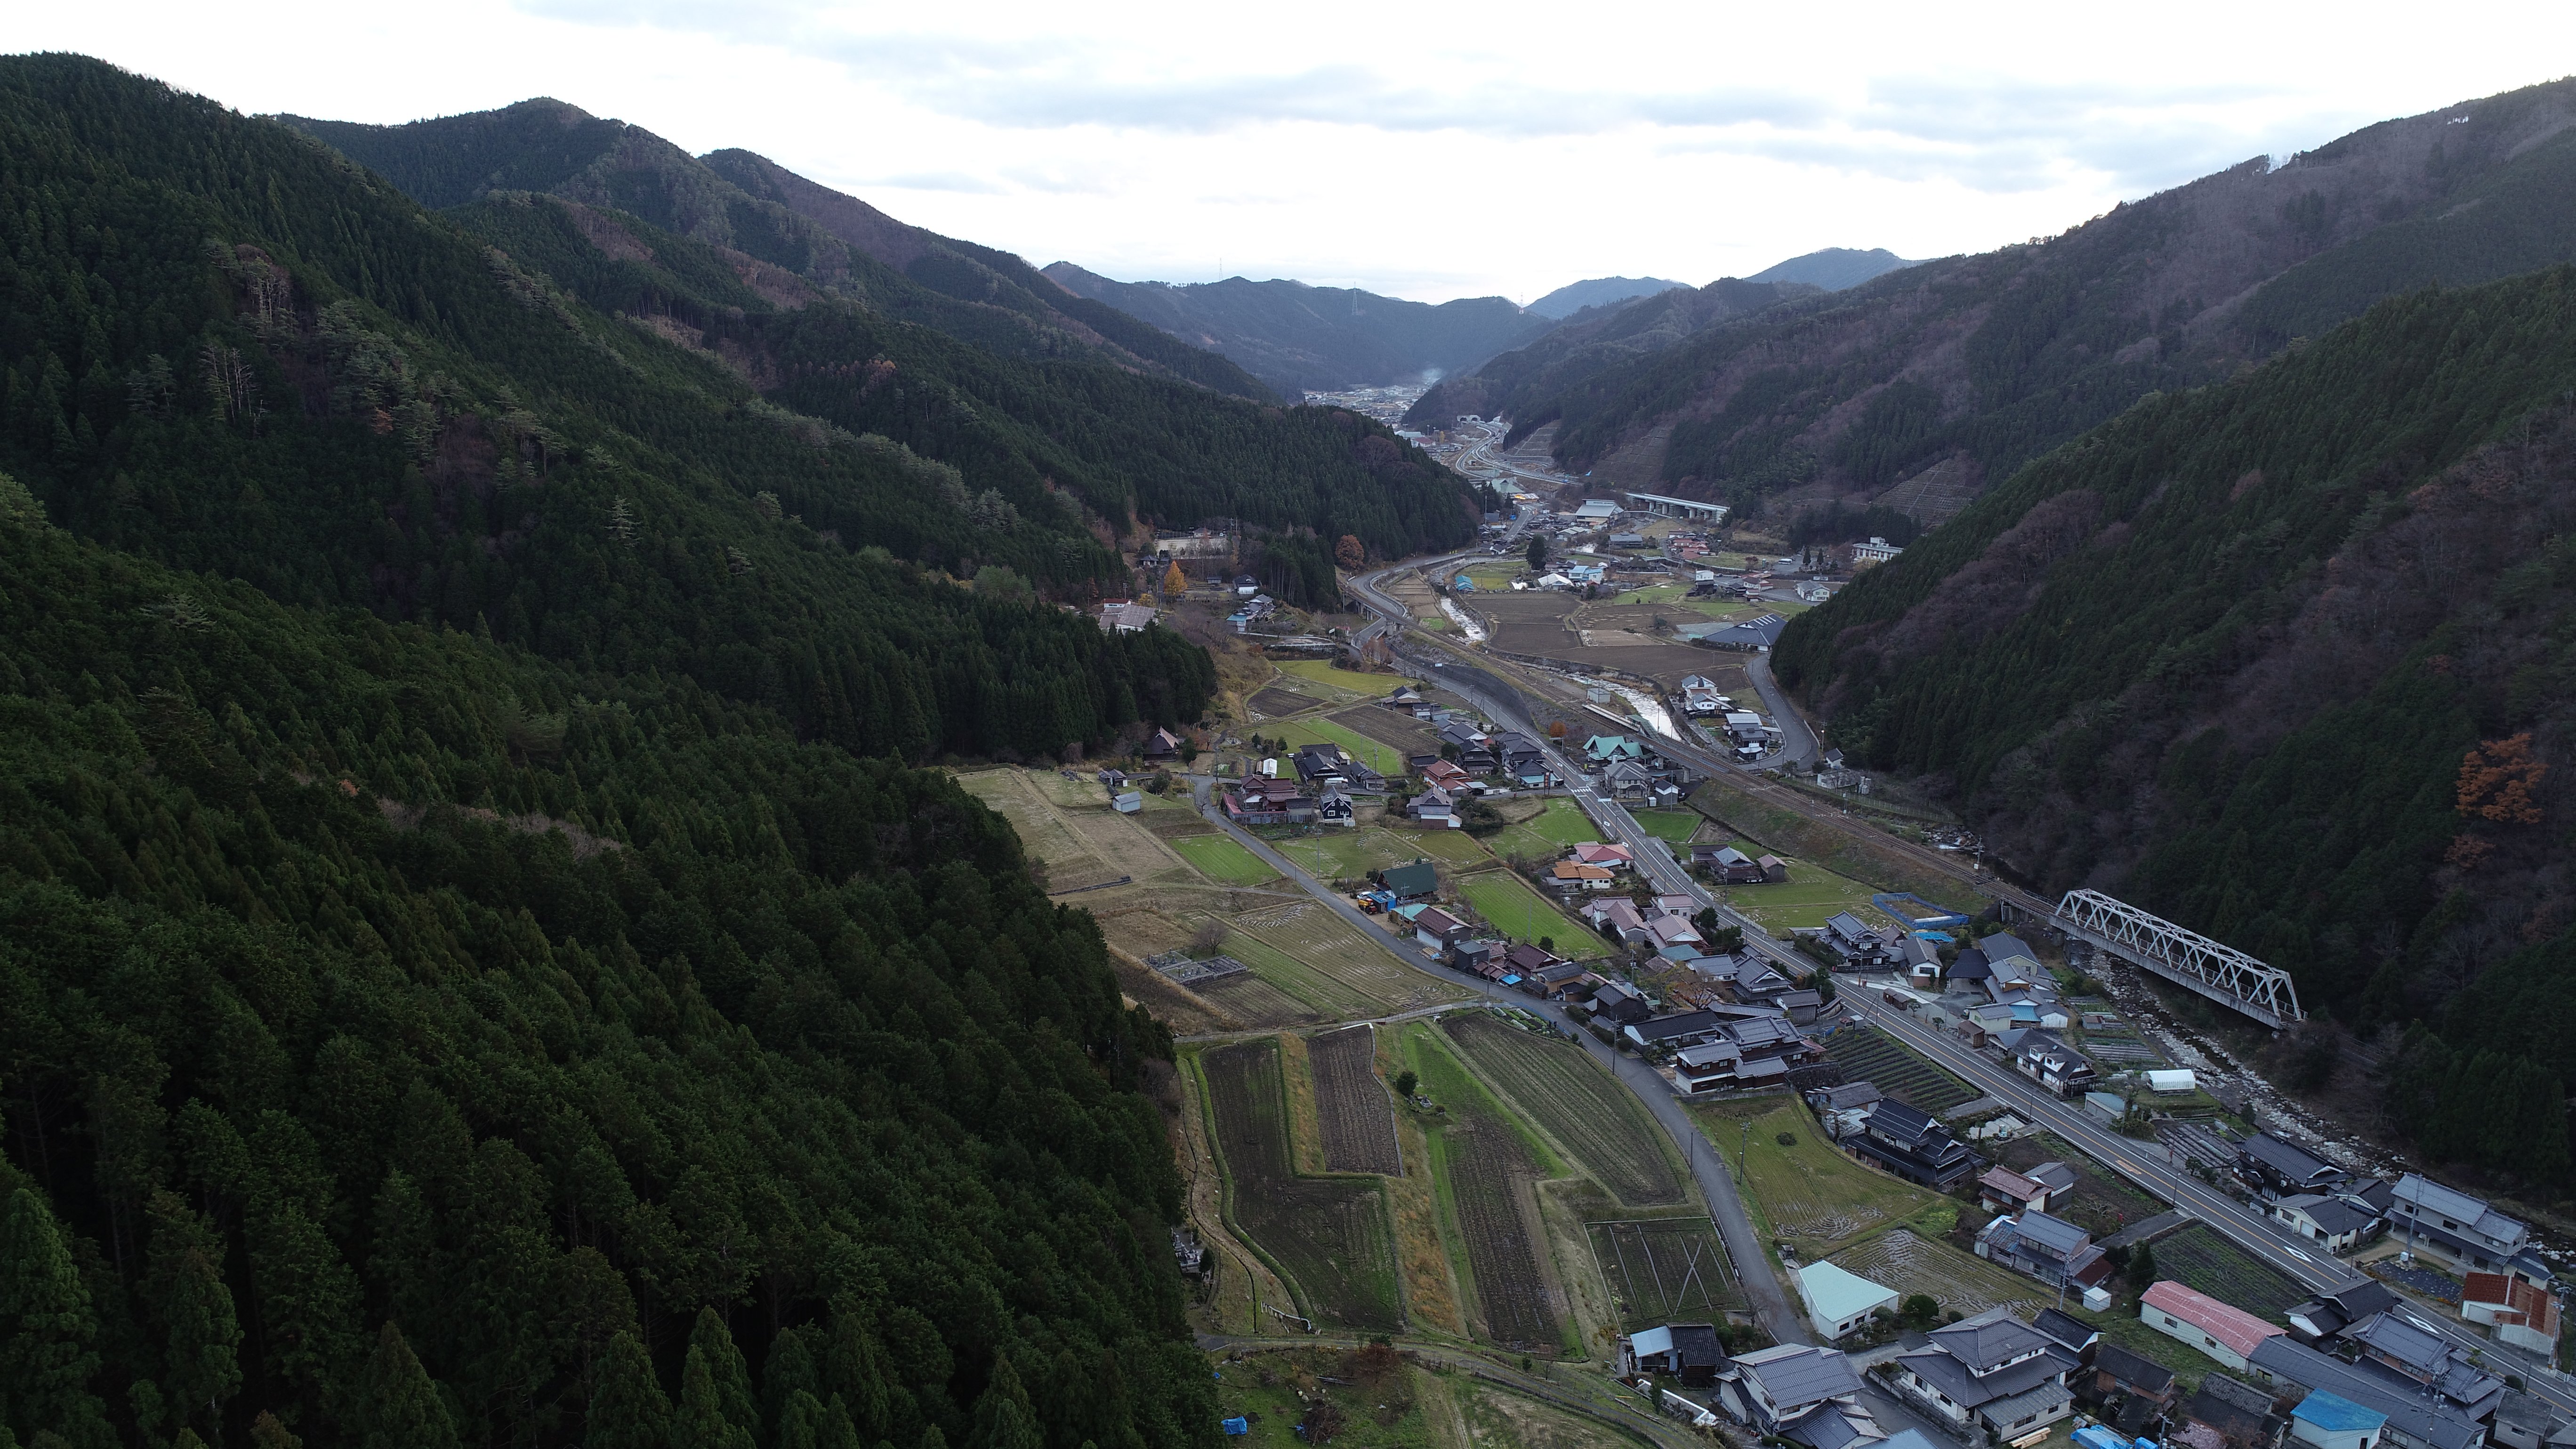 Learning From the Past: Japan's tree-planting efforts provide lessons for other countries